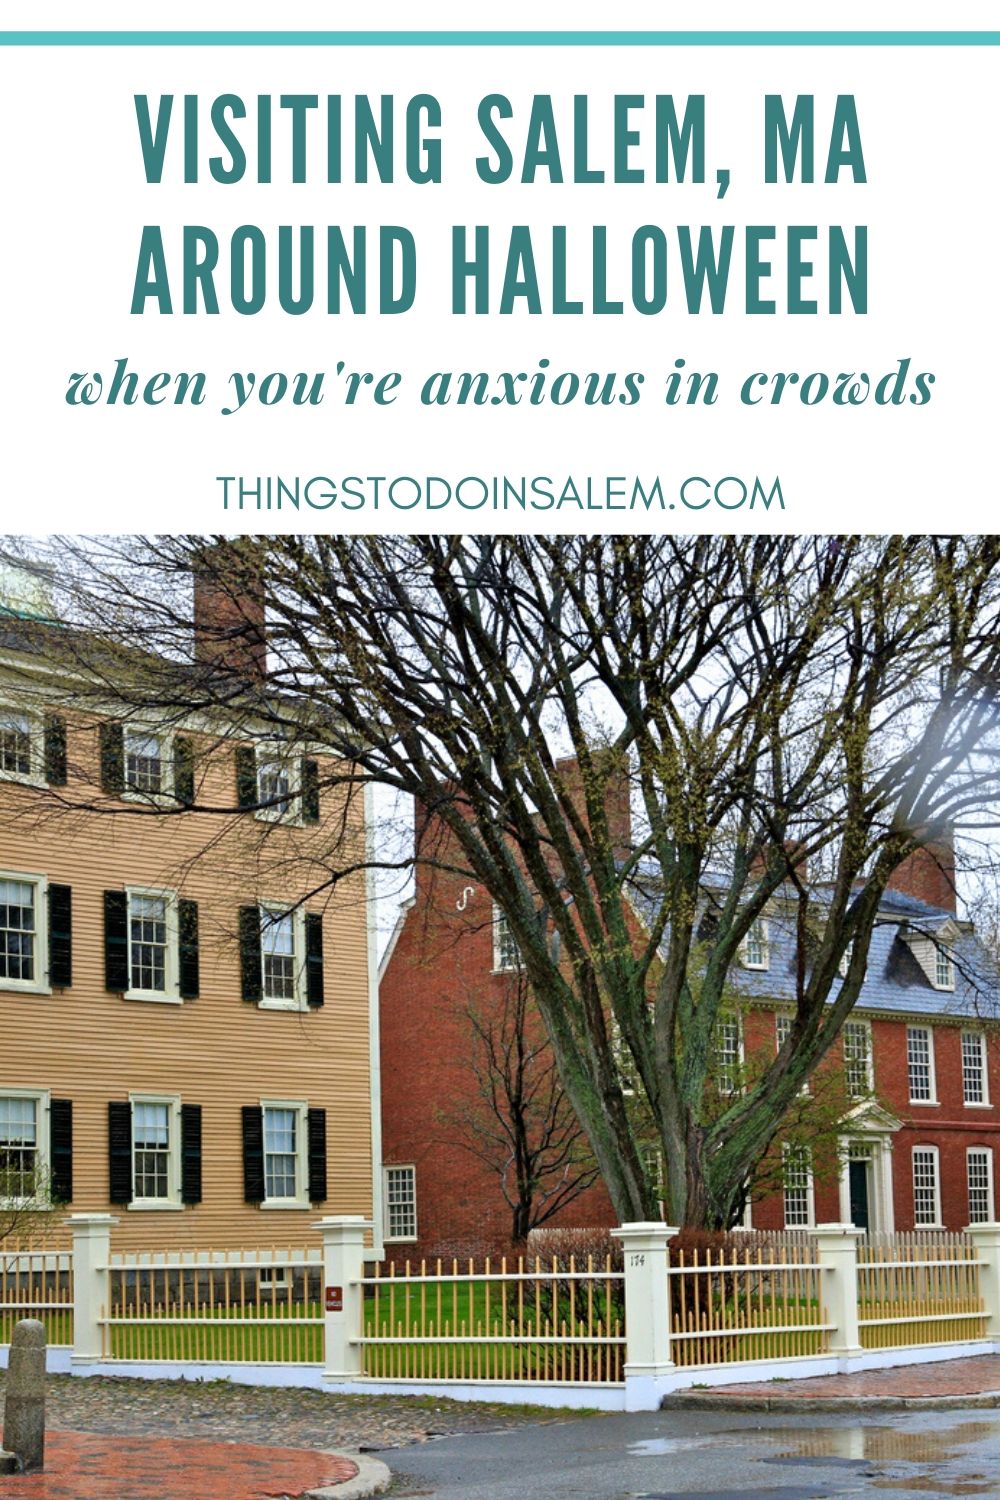 things to do in salem, visiting salem ma around halloween when you're anxious in crowds